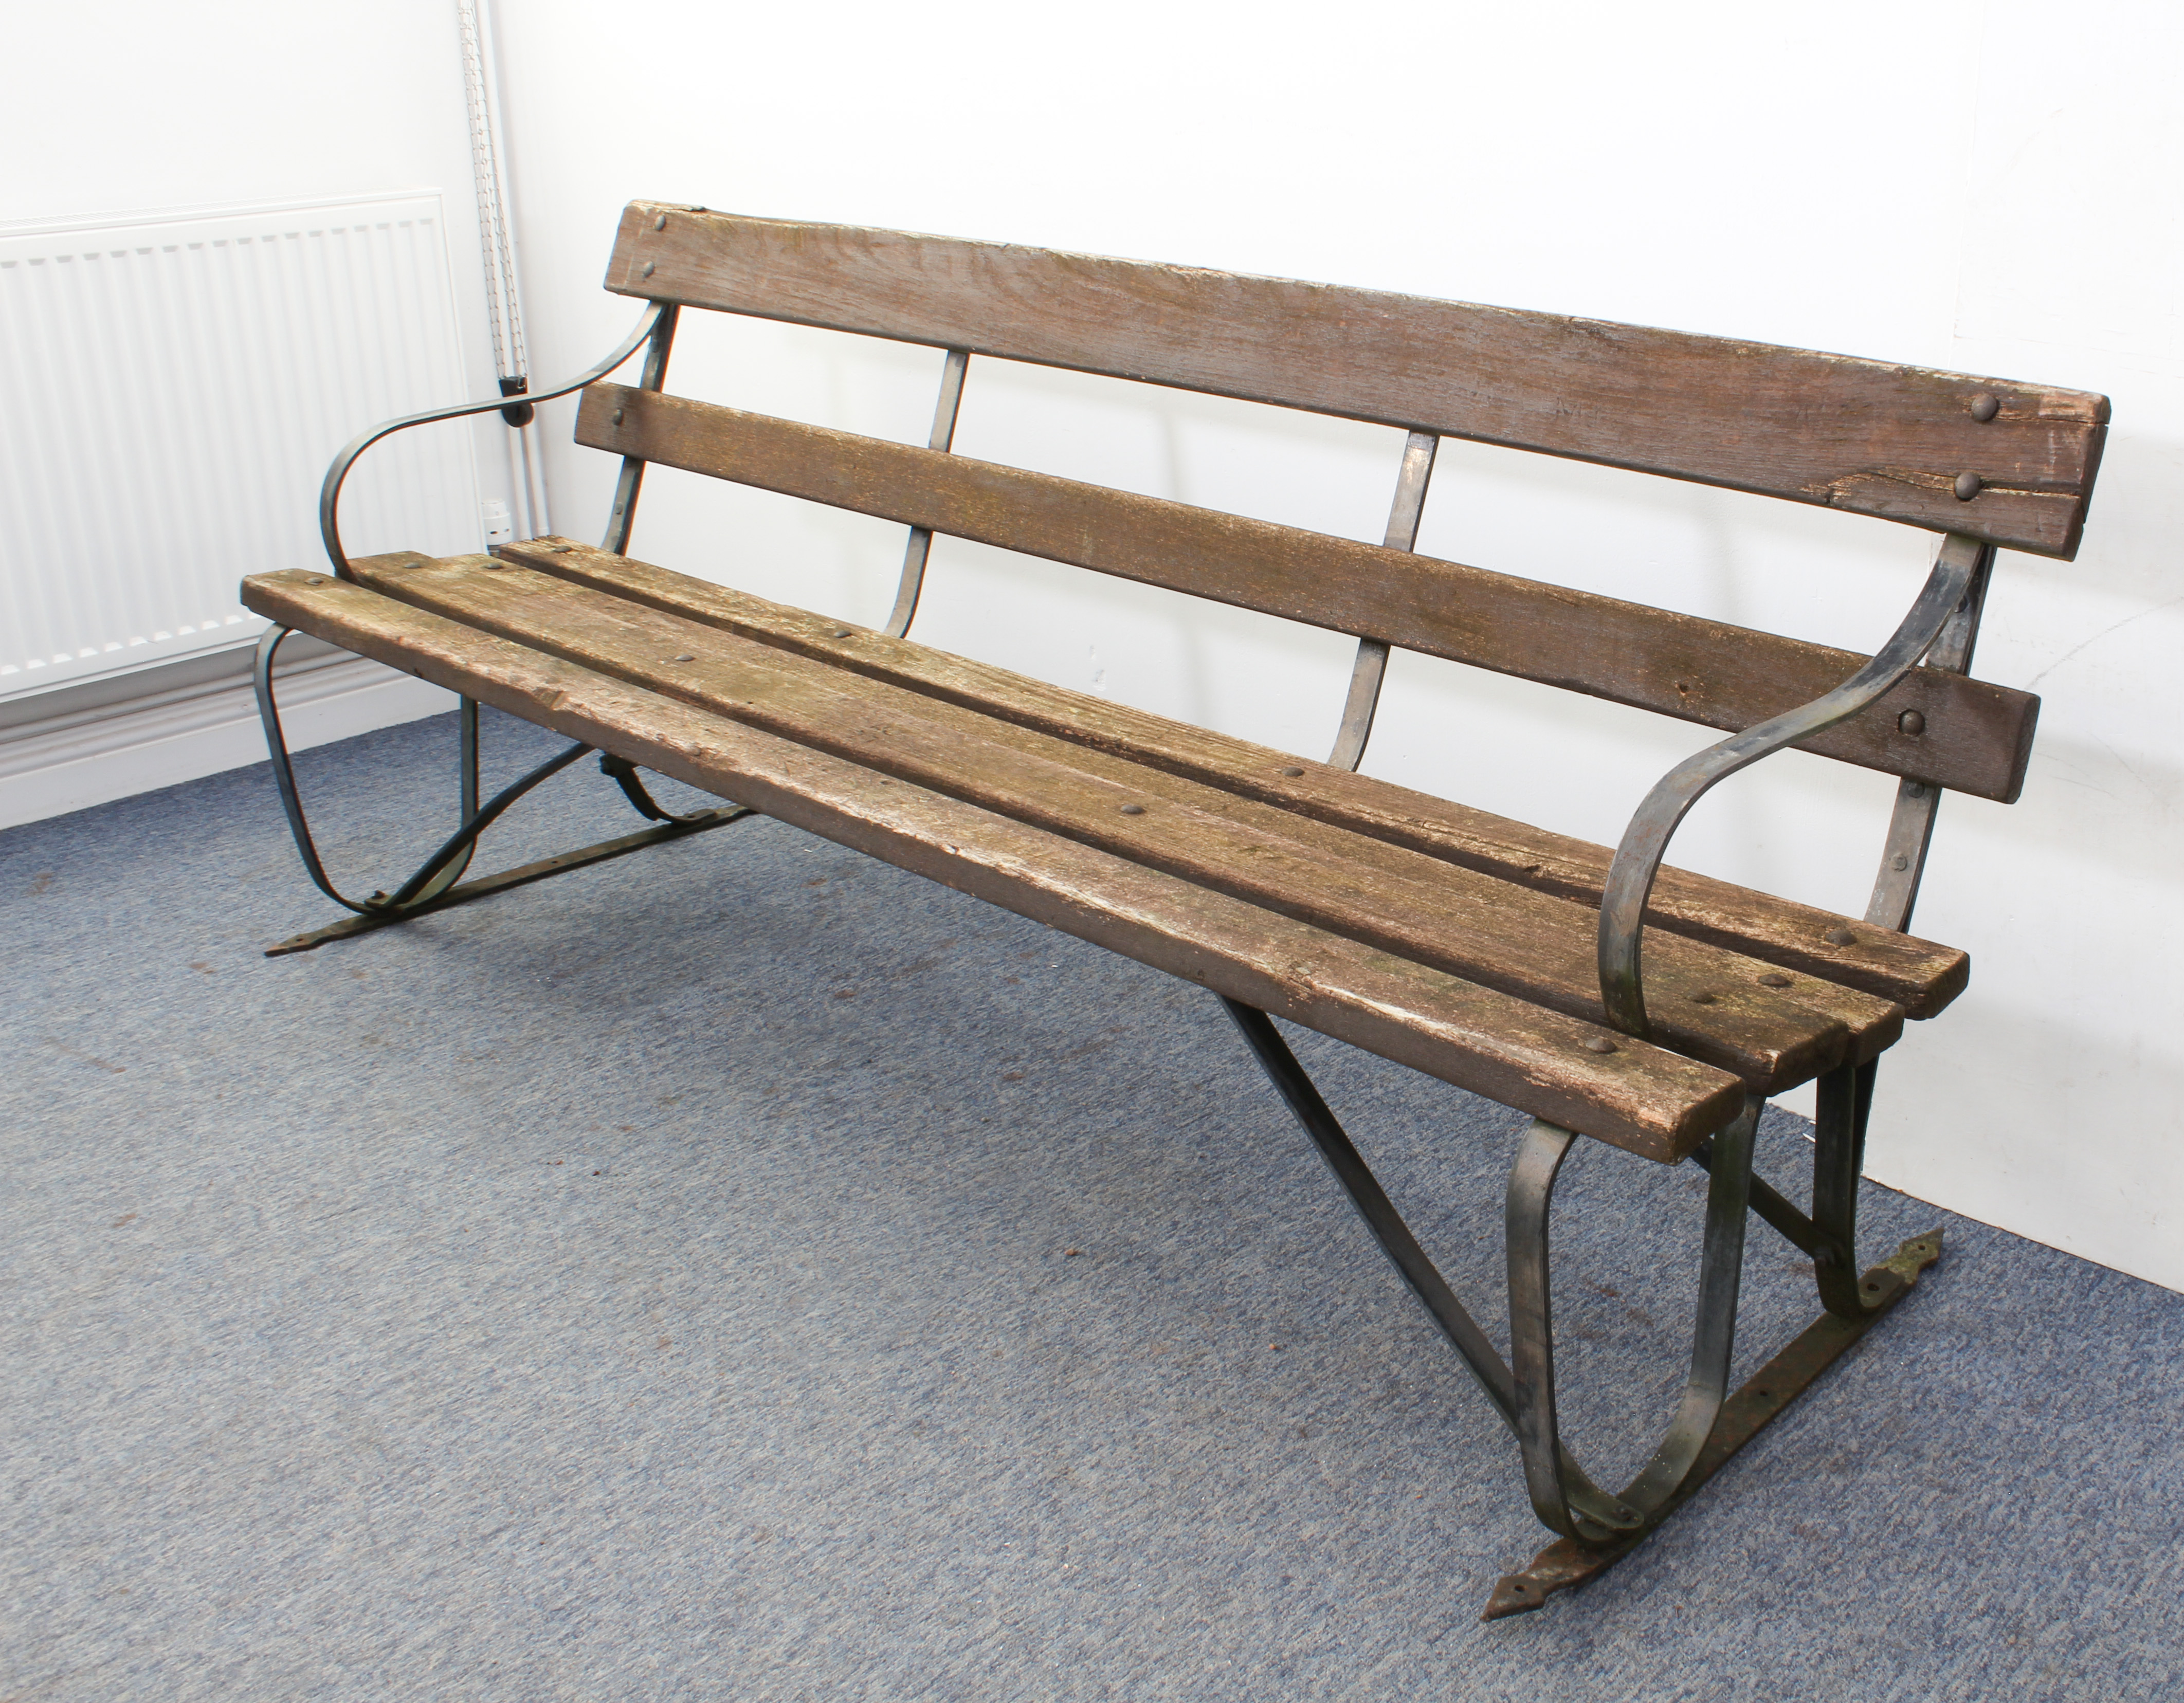 A wrought iron and hardwood slatted garden bench - 198 cm long. (similar to lot 549) - Image 2 of 3